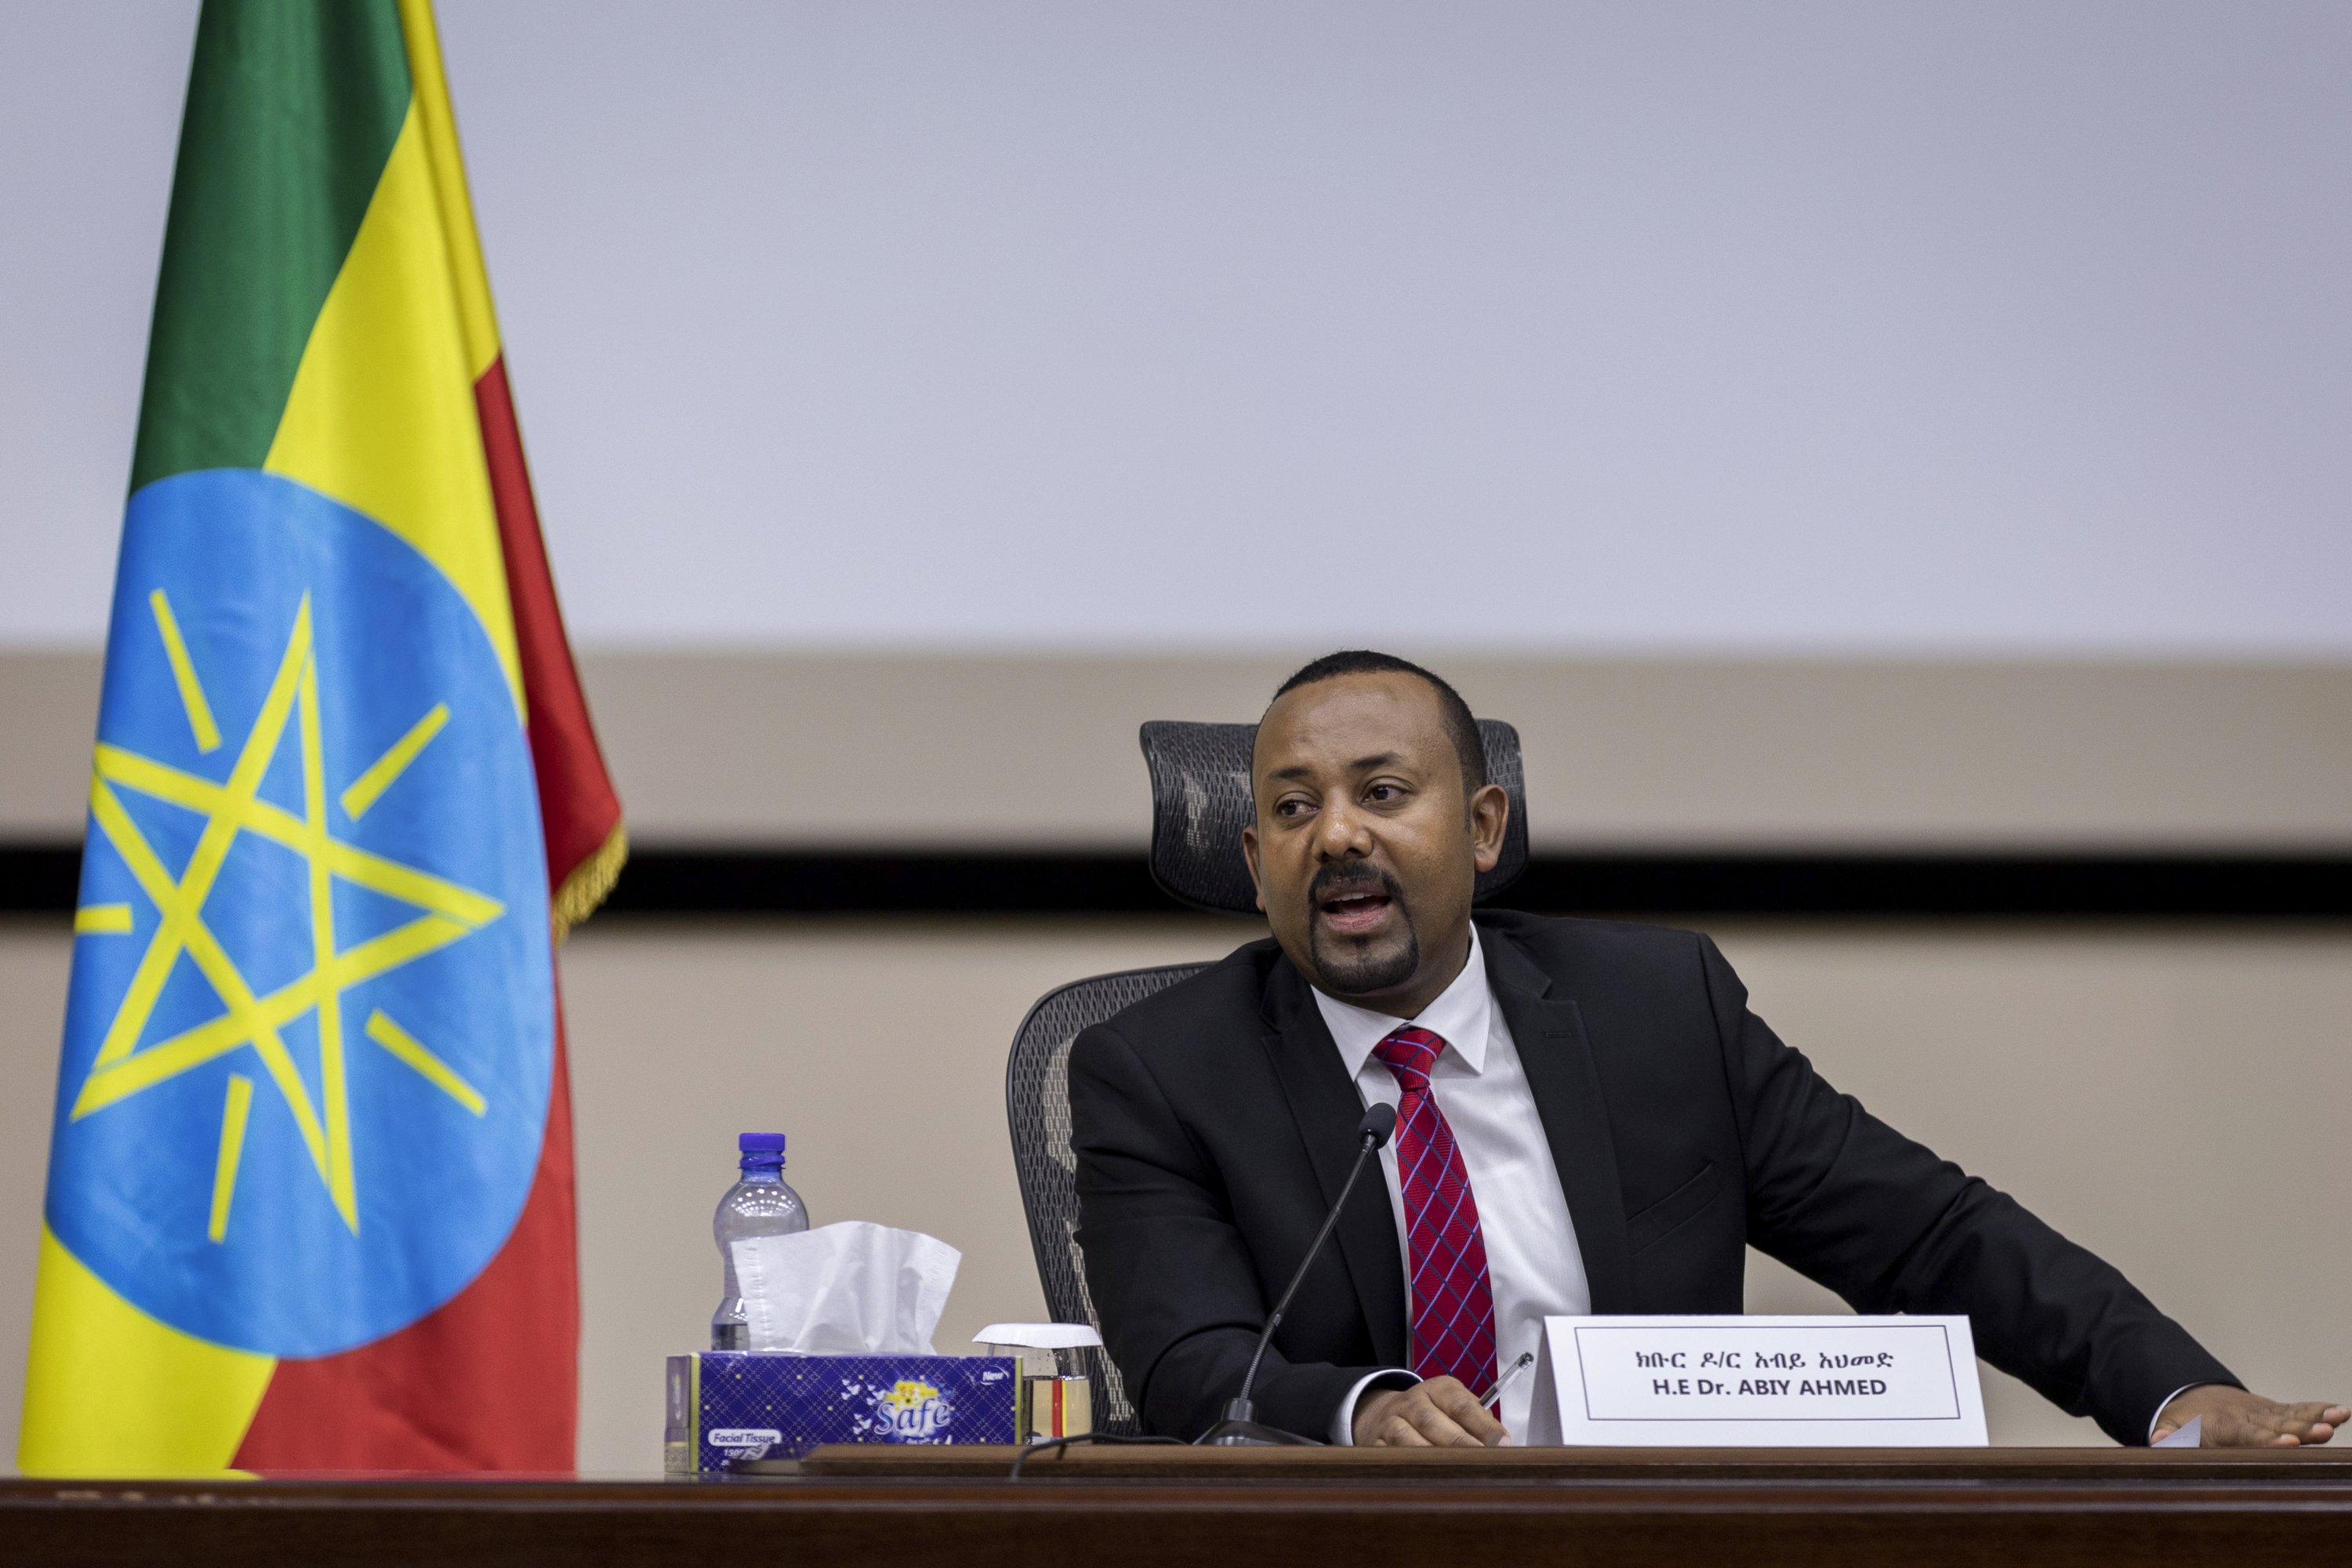 Ethiopian forces killed dozens in riots from June to July